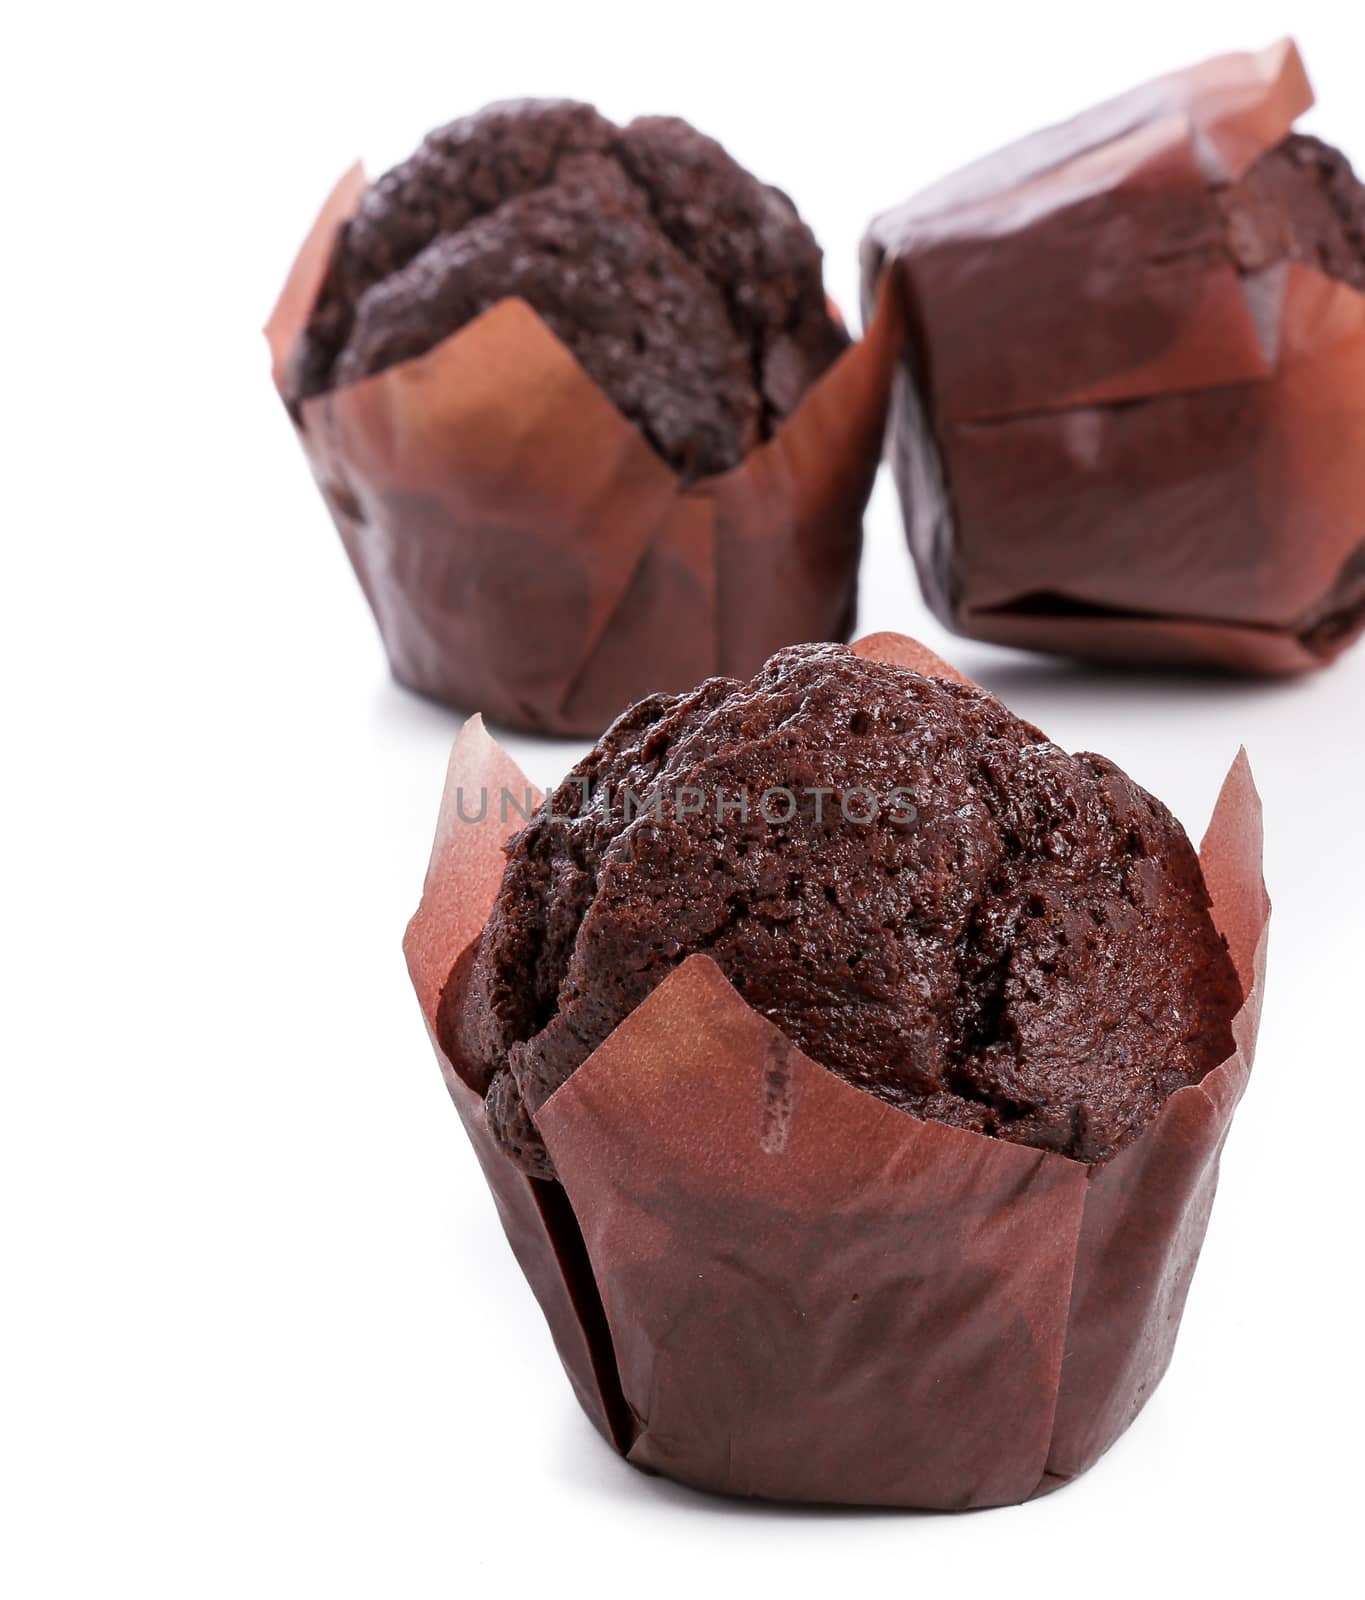 Delicious muffin on a white background